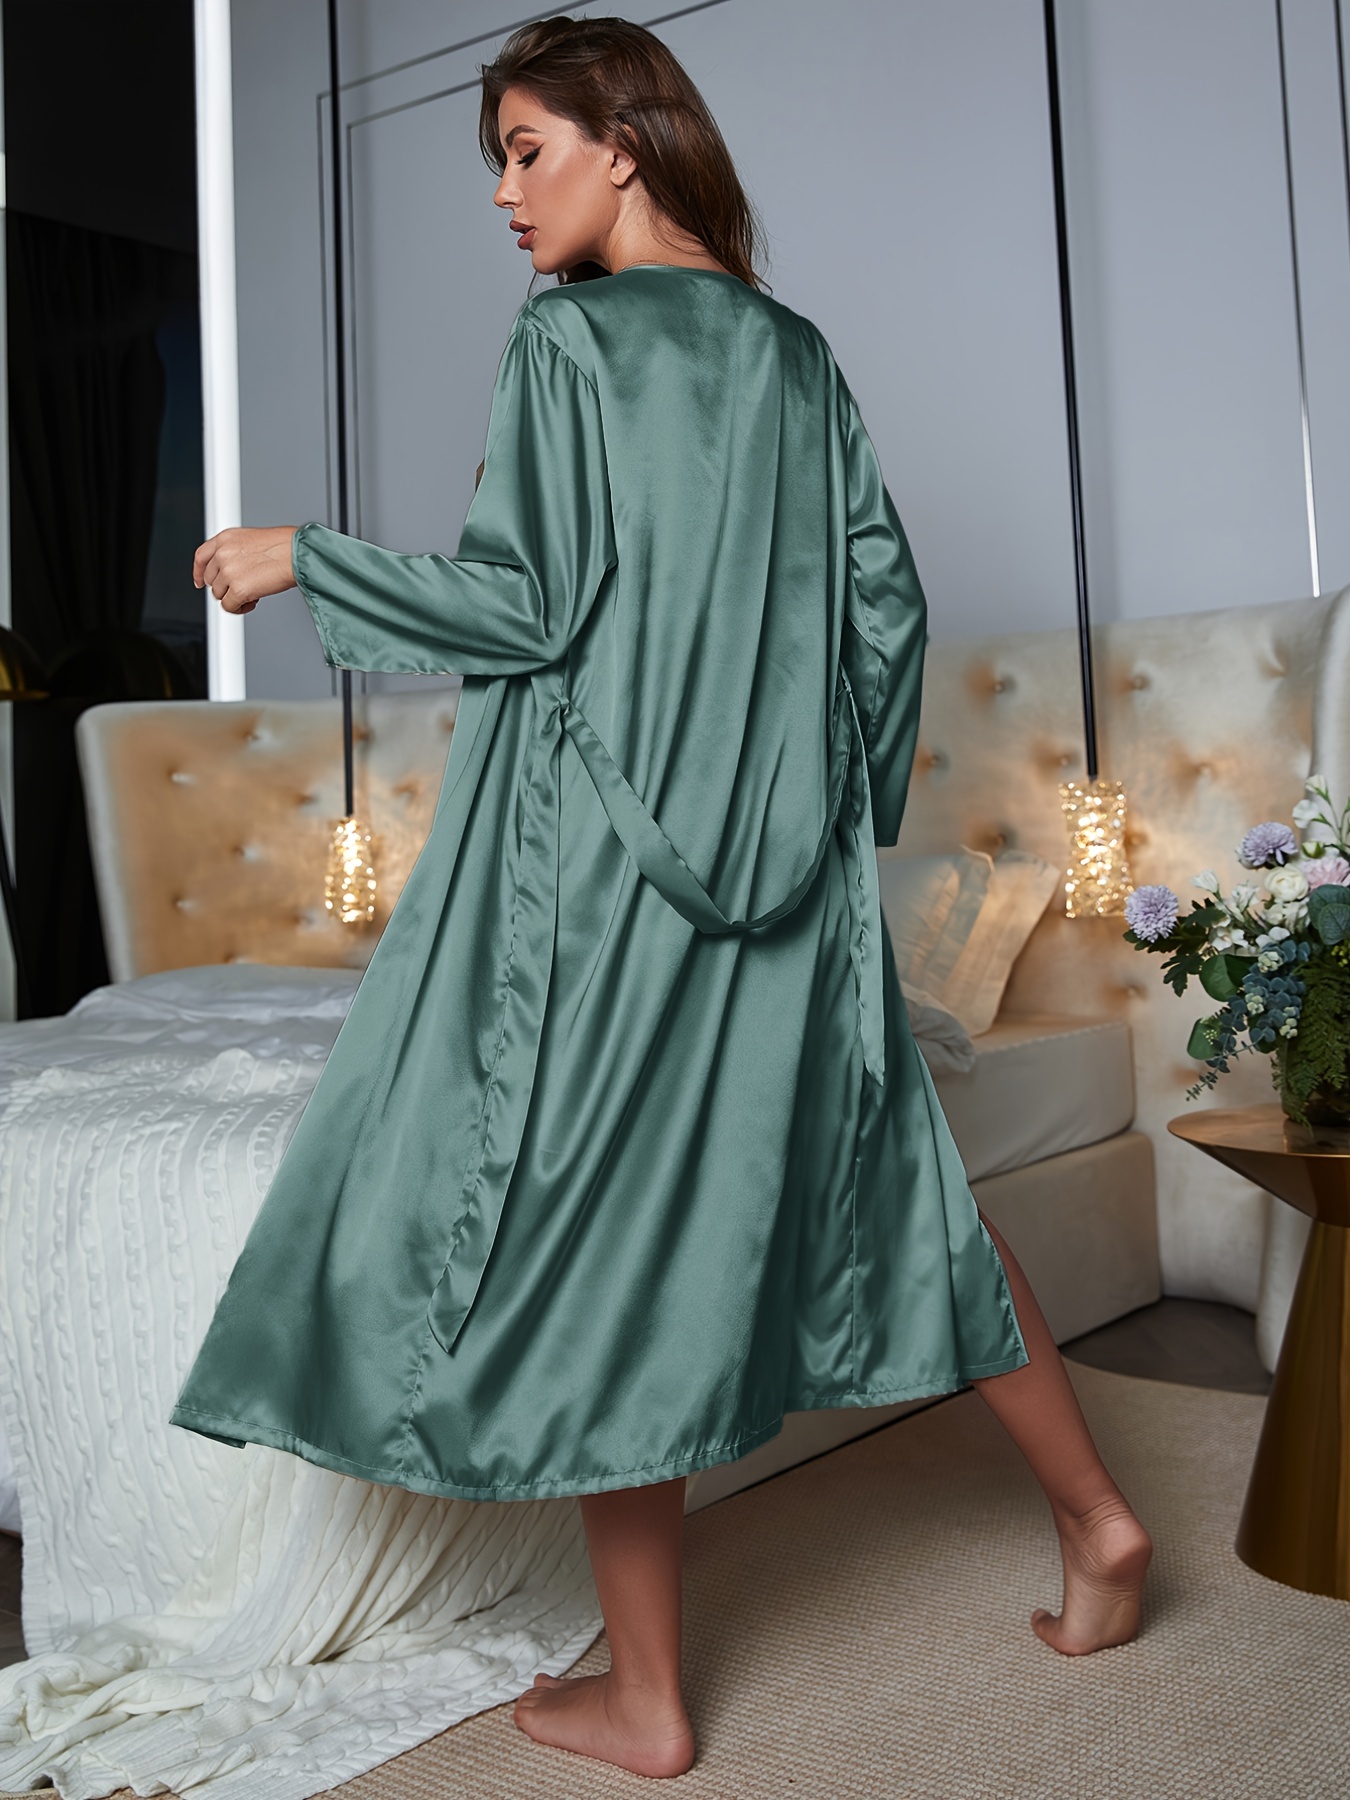 Custom Made Ruched Silk Night Gown With Chic Lace V Neck And Long Sleeves  Elegant Bride Satin Sleepwear Robe With Sash From Freesuit, $51.31